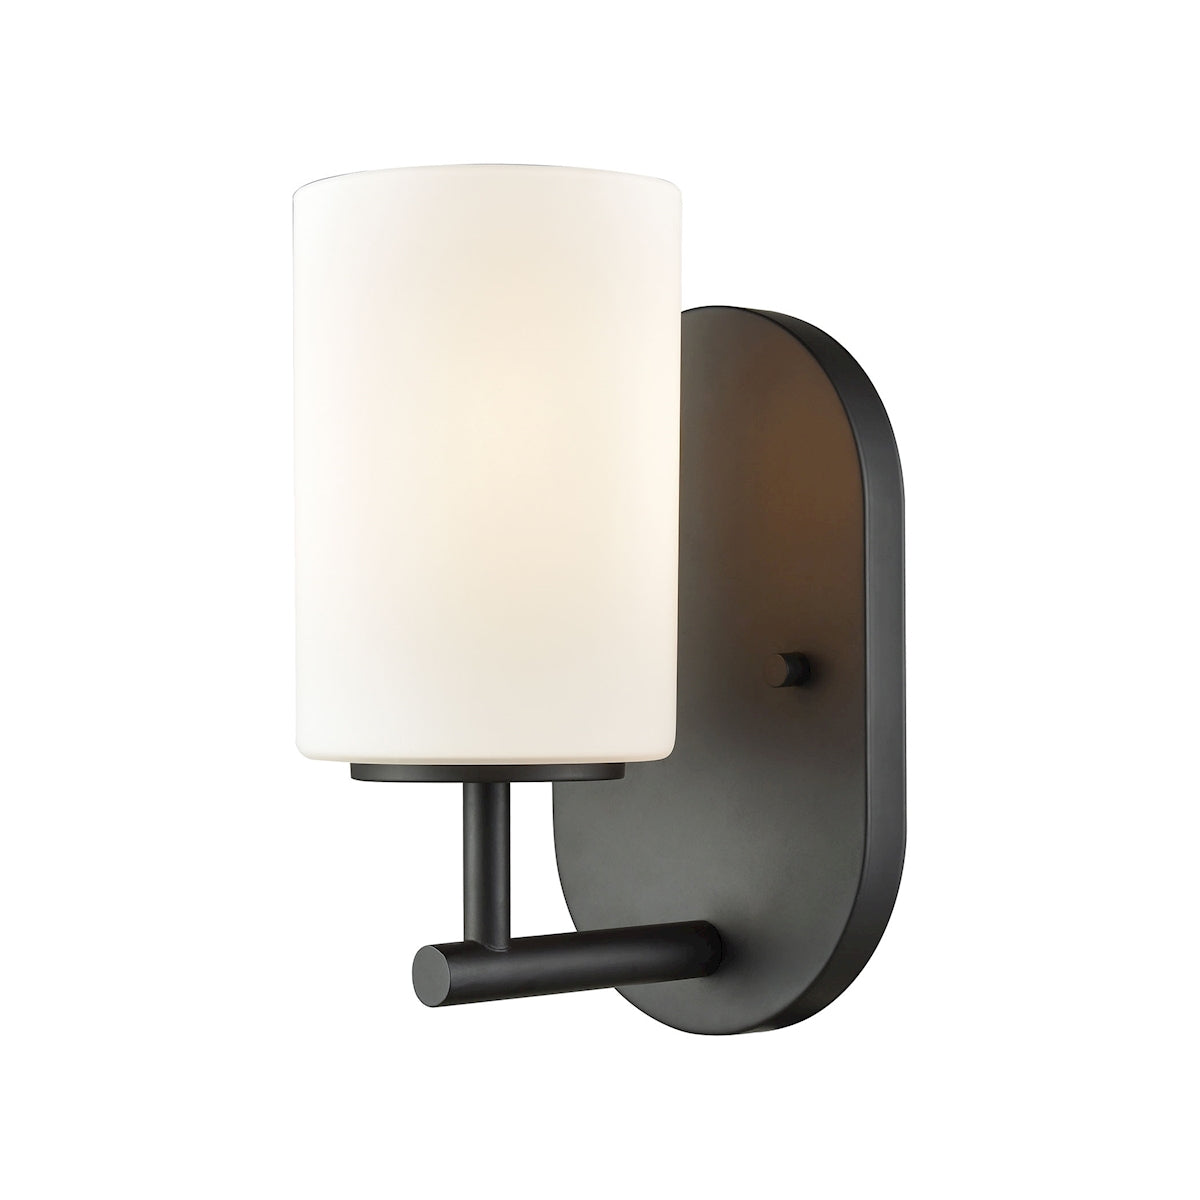 ELK Lighting 57140/1 Pemlico 1-Light Vanity Lamp in Oil Rubbed Bronze with White Glass